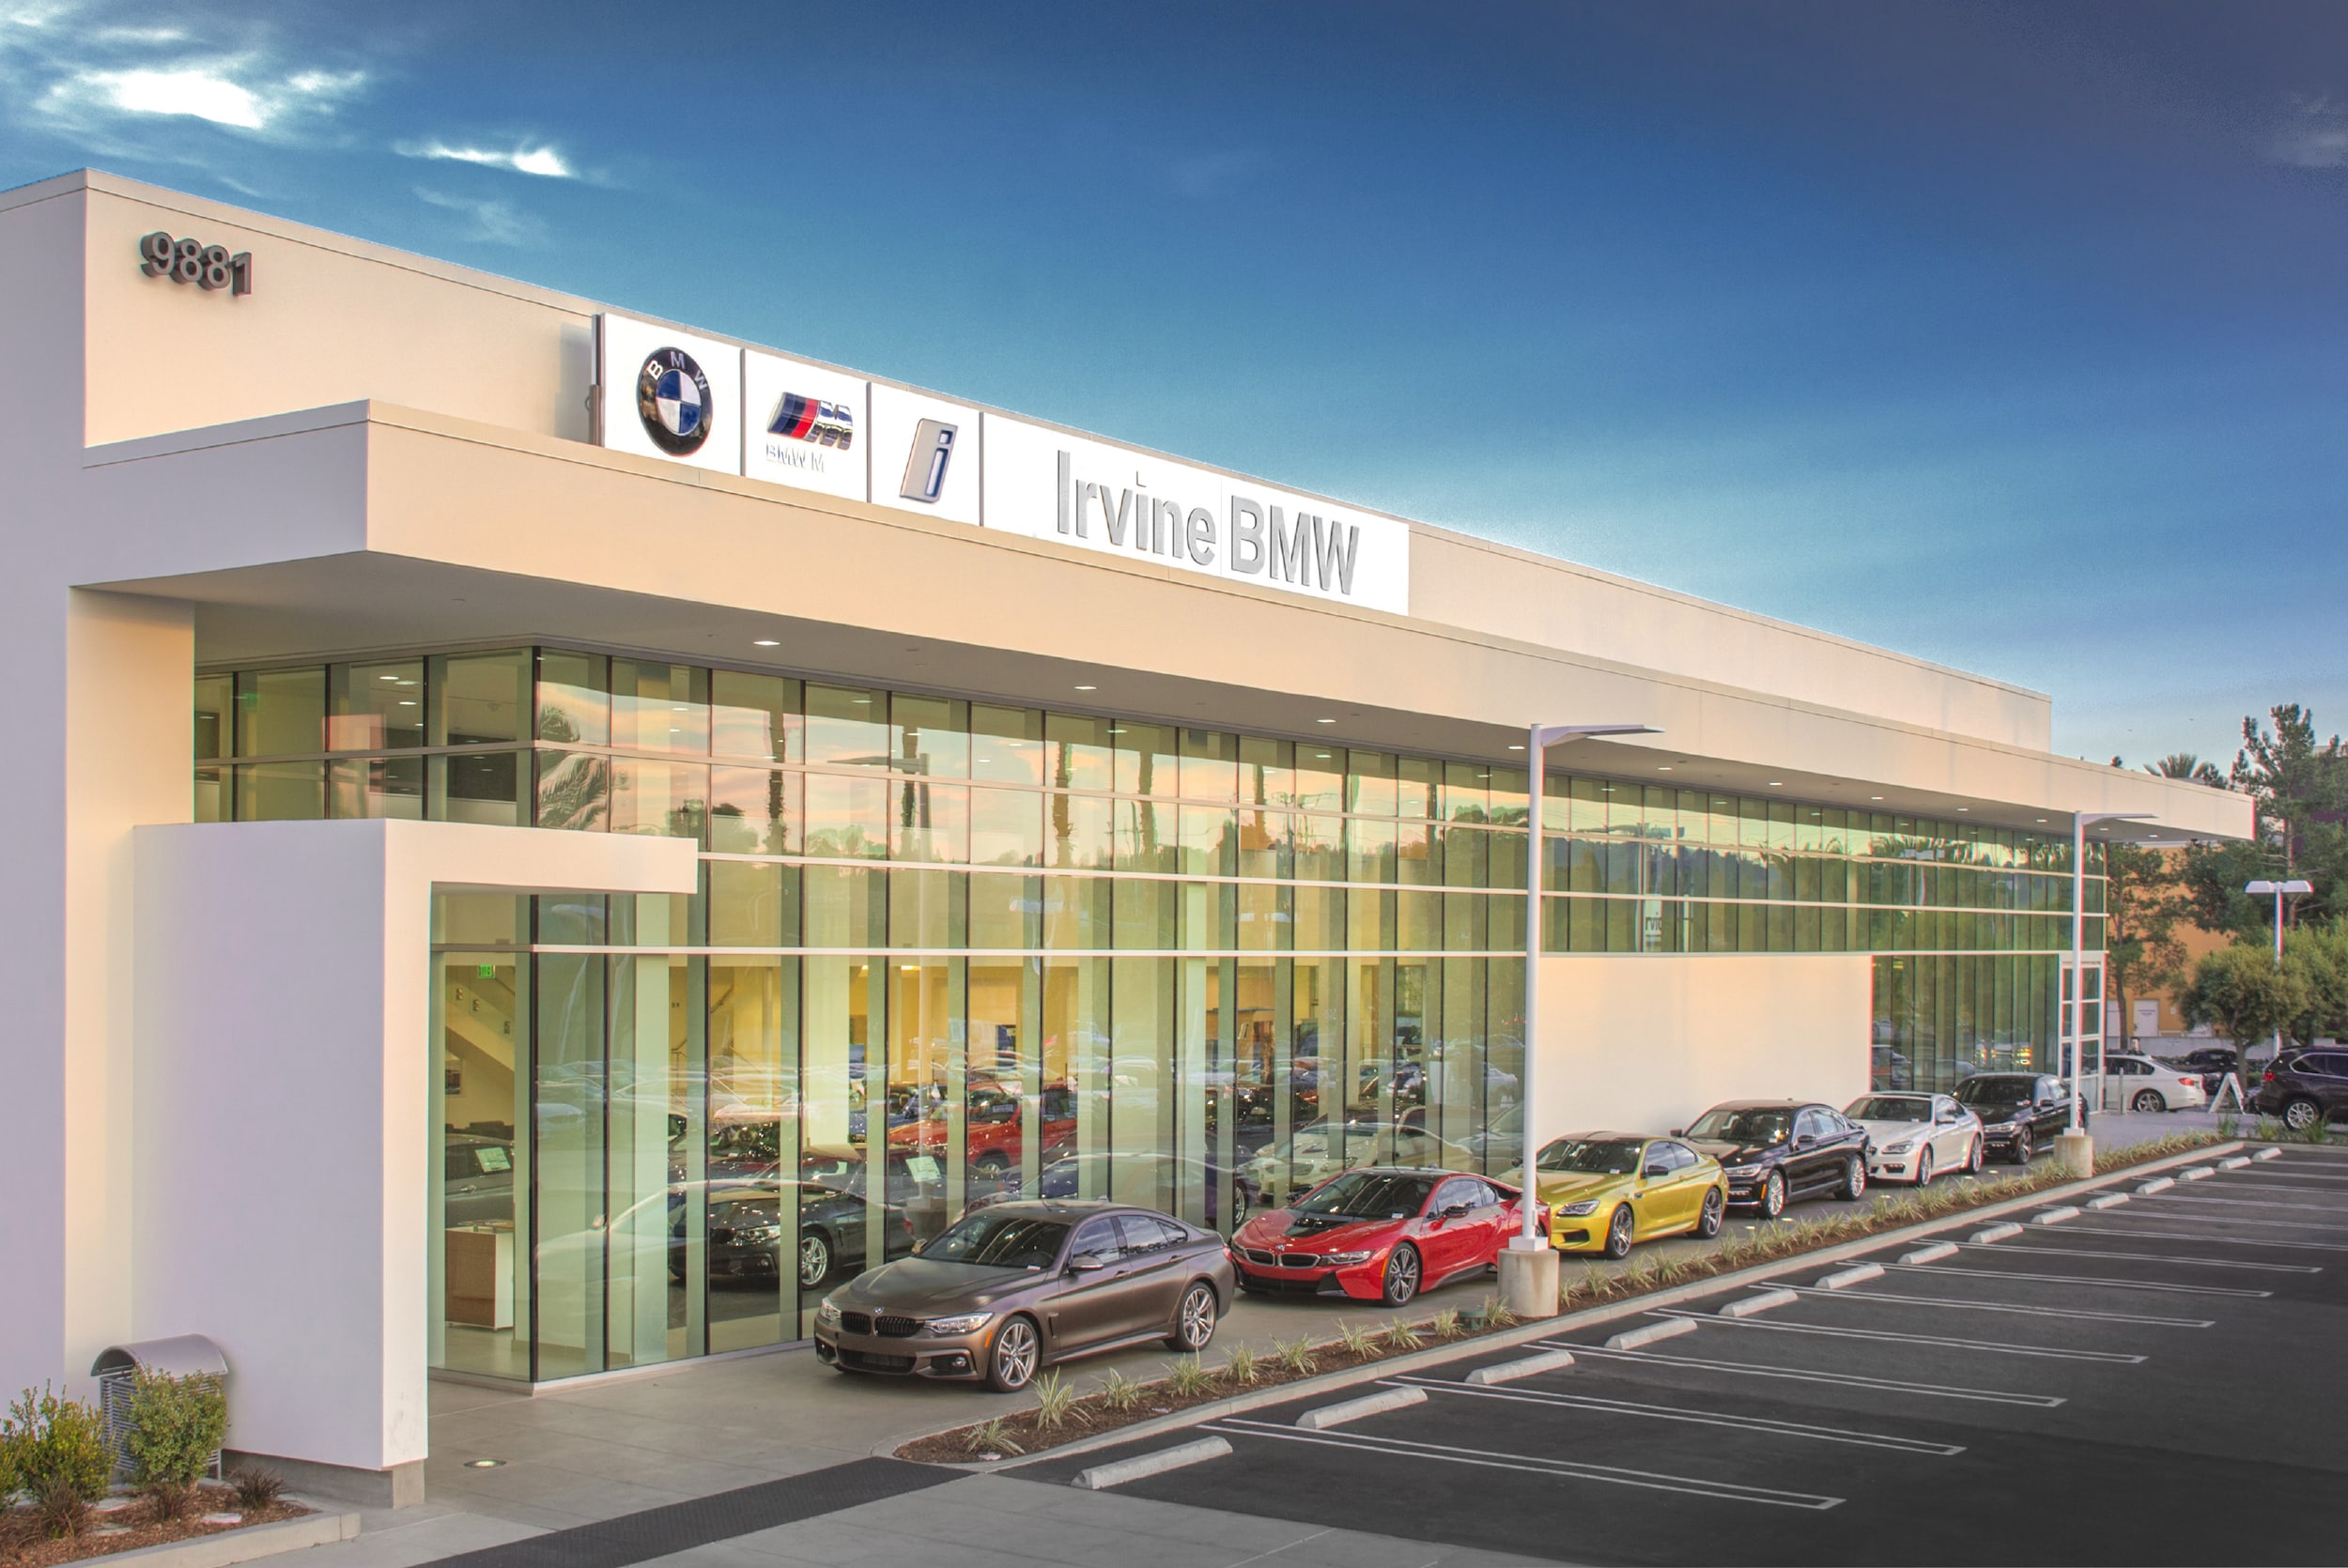 About Irvine BMW | New BMW and Used Car Dealer in Irvine, CA